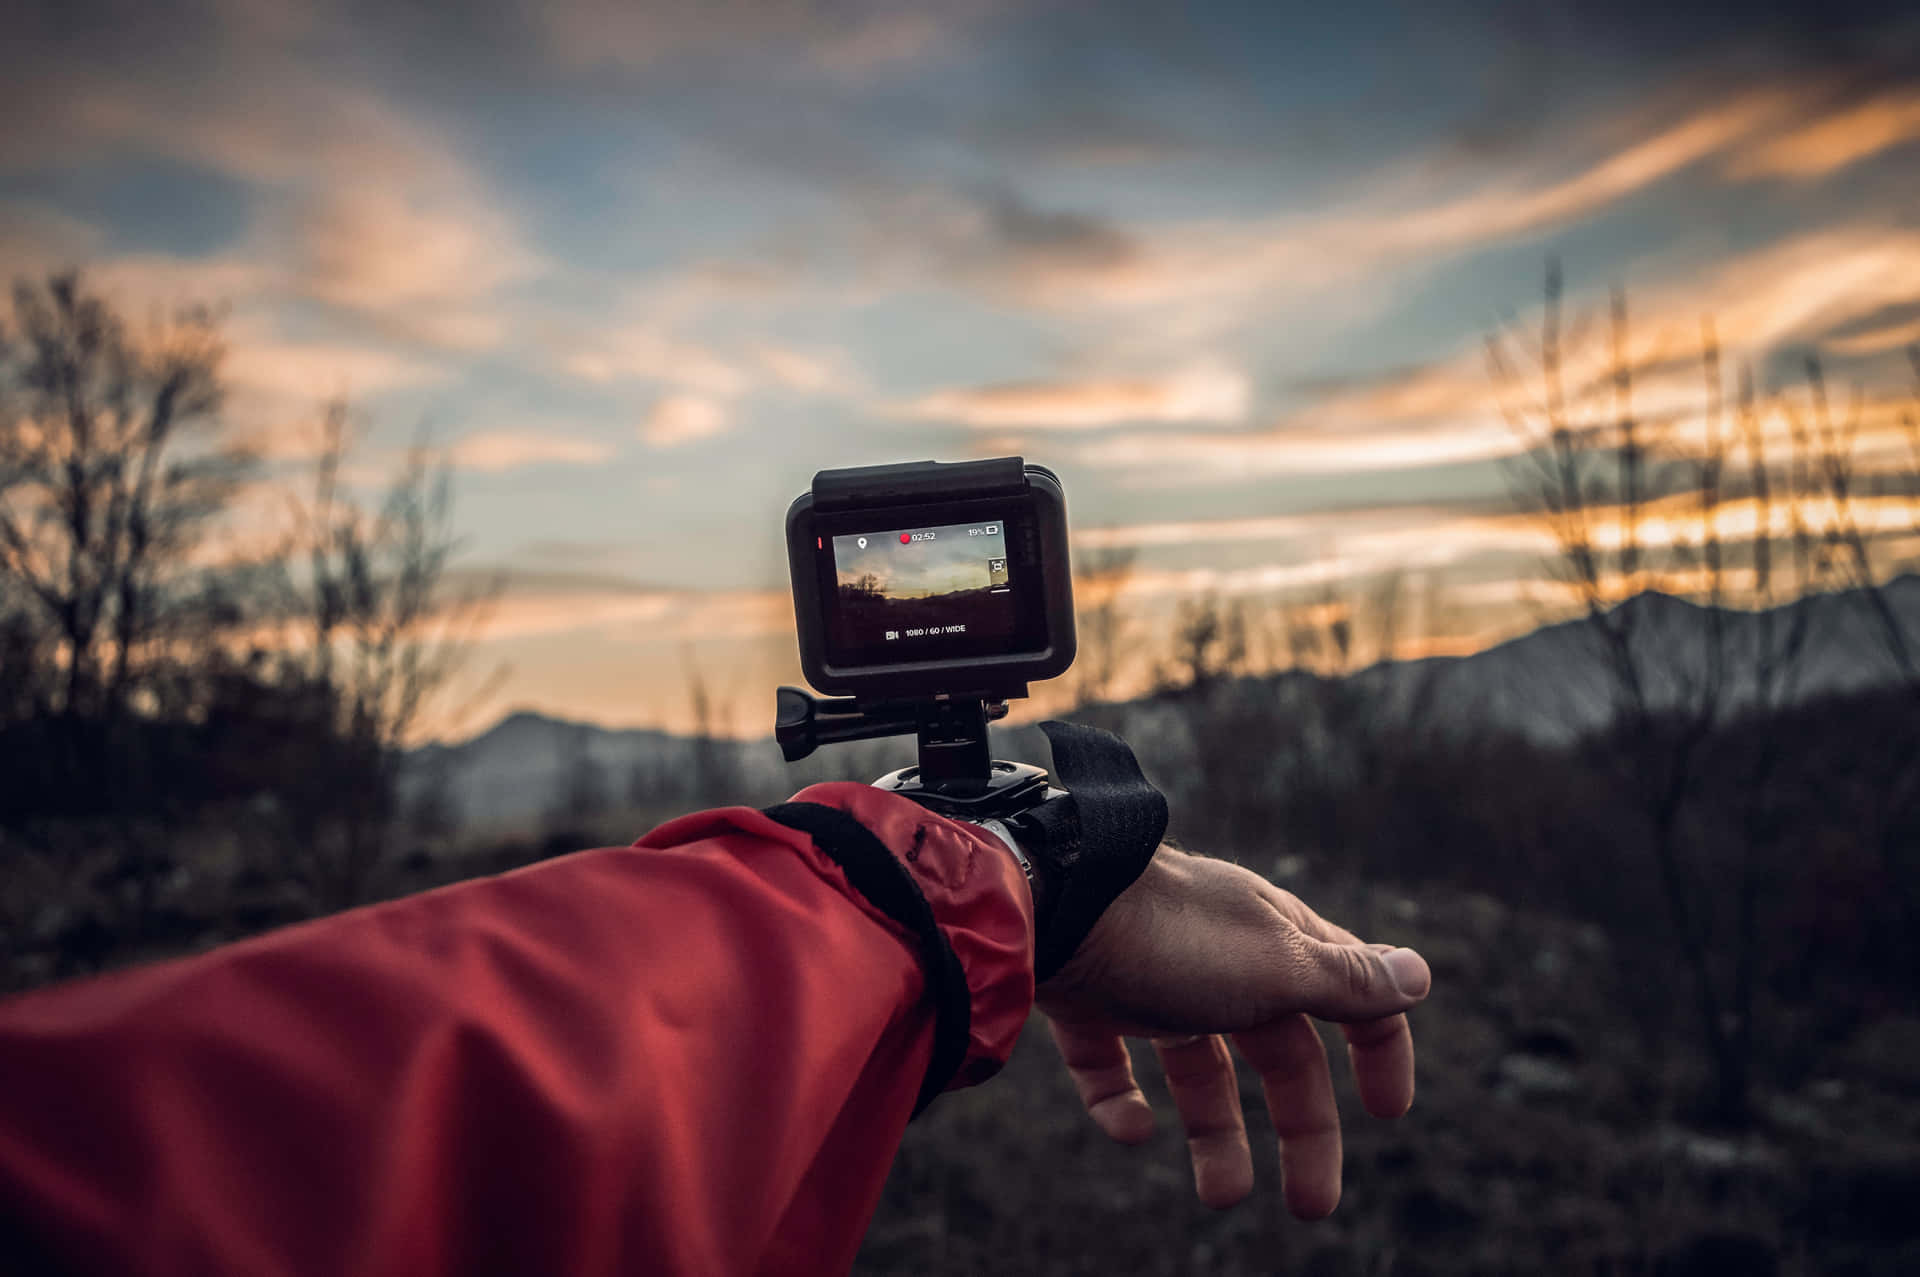 Slide into adventure with a GoPro HERO8 camera